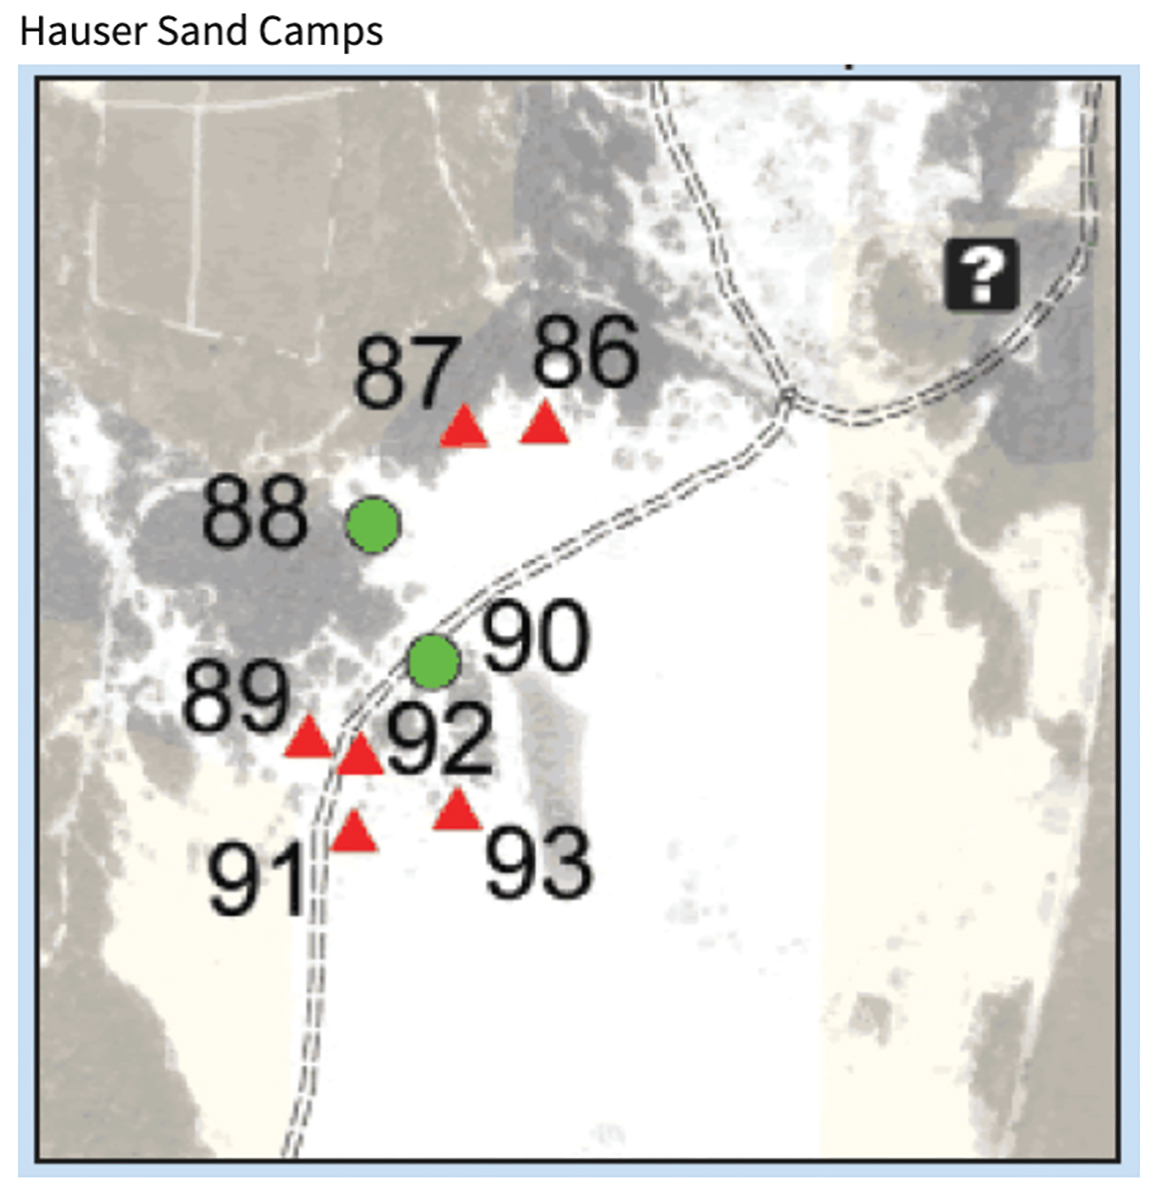 Camping-Spots-Hauser-Sand-Camping-by-USFS.jpg